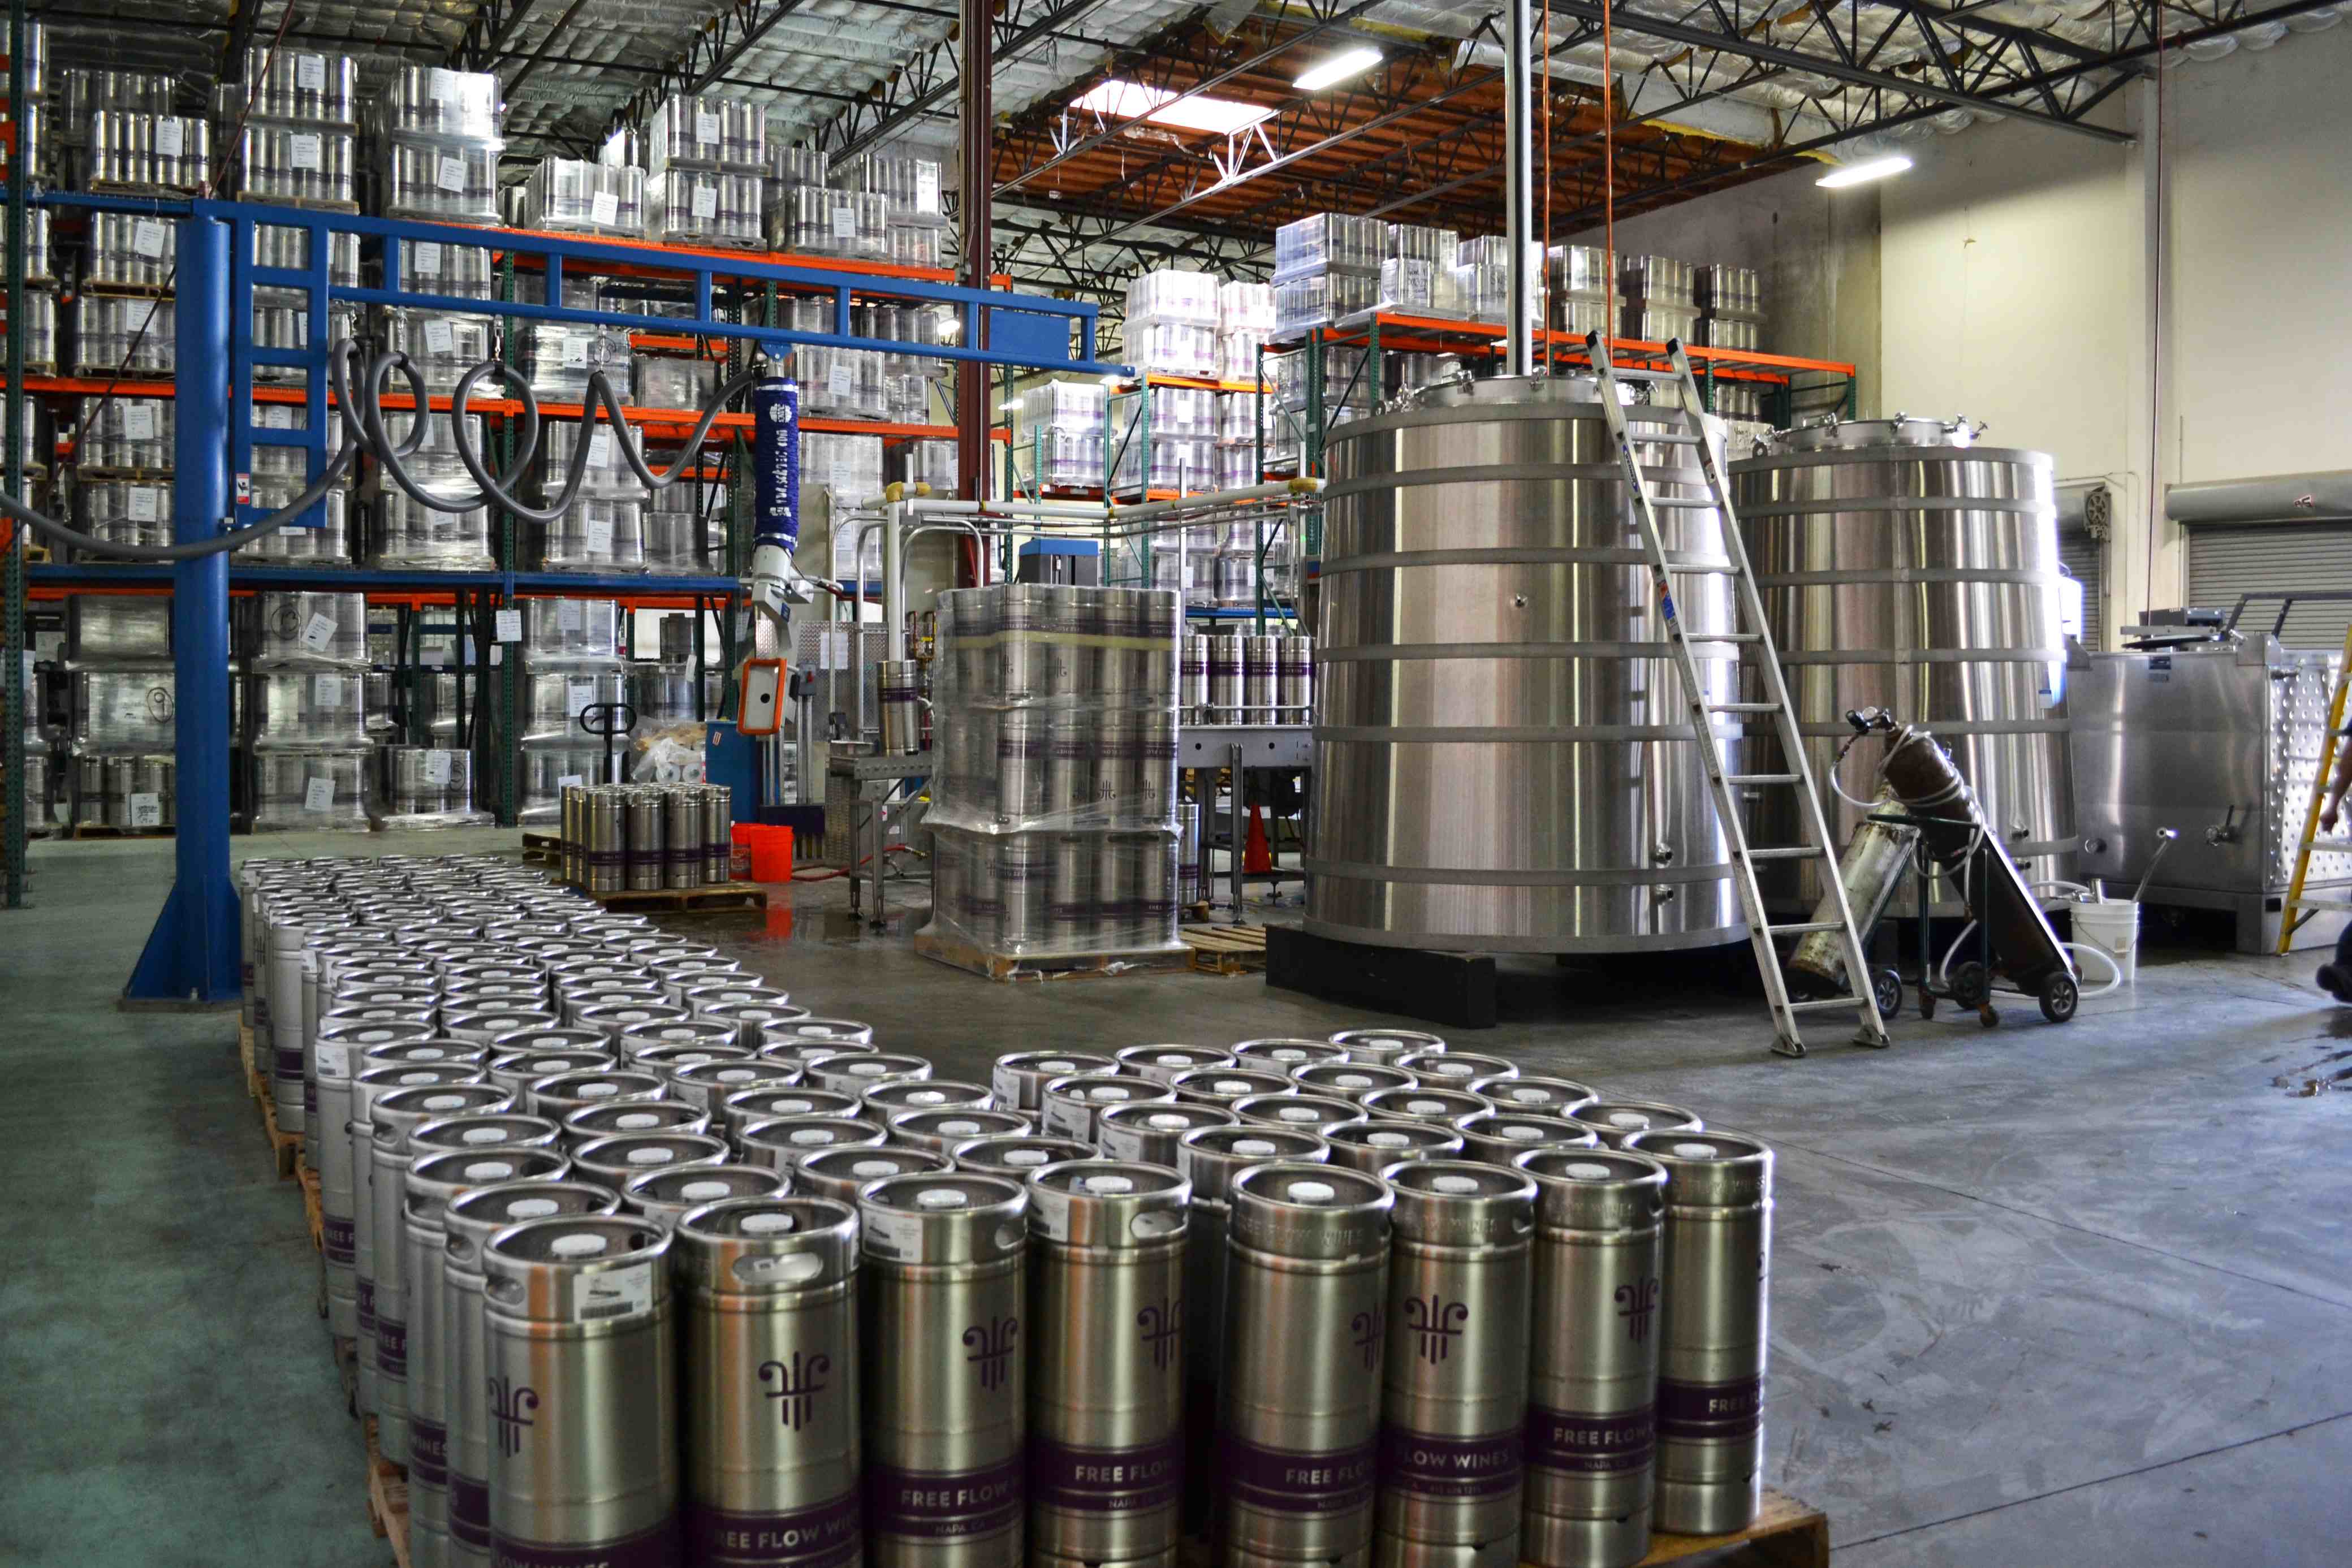 A Free Flow Wines keg holds the equivalent of 26 wine bottles and each keg that goes into distribution will save 2,340 lbs. of trash from the landfill over its lifetime.